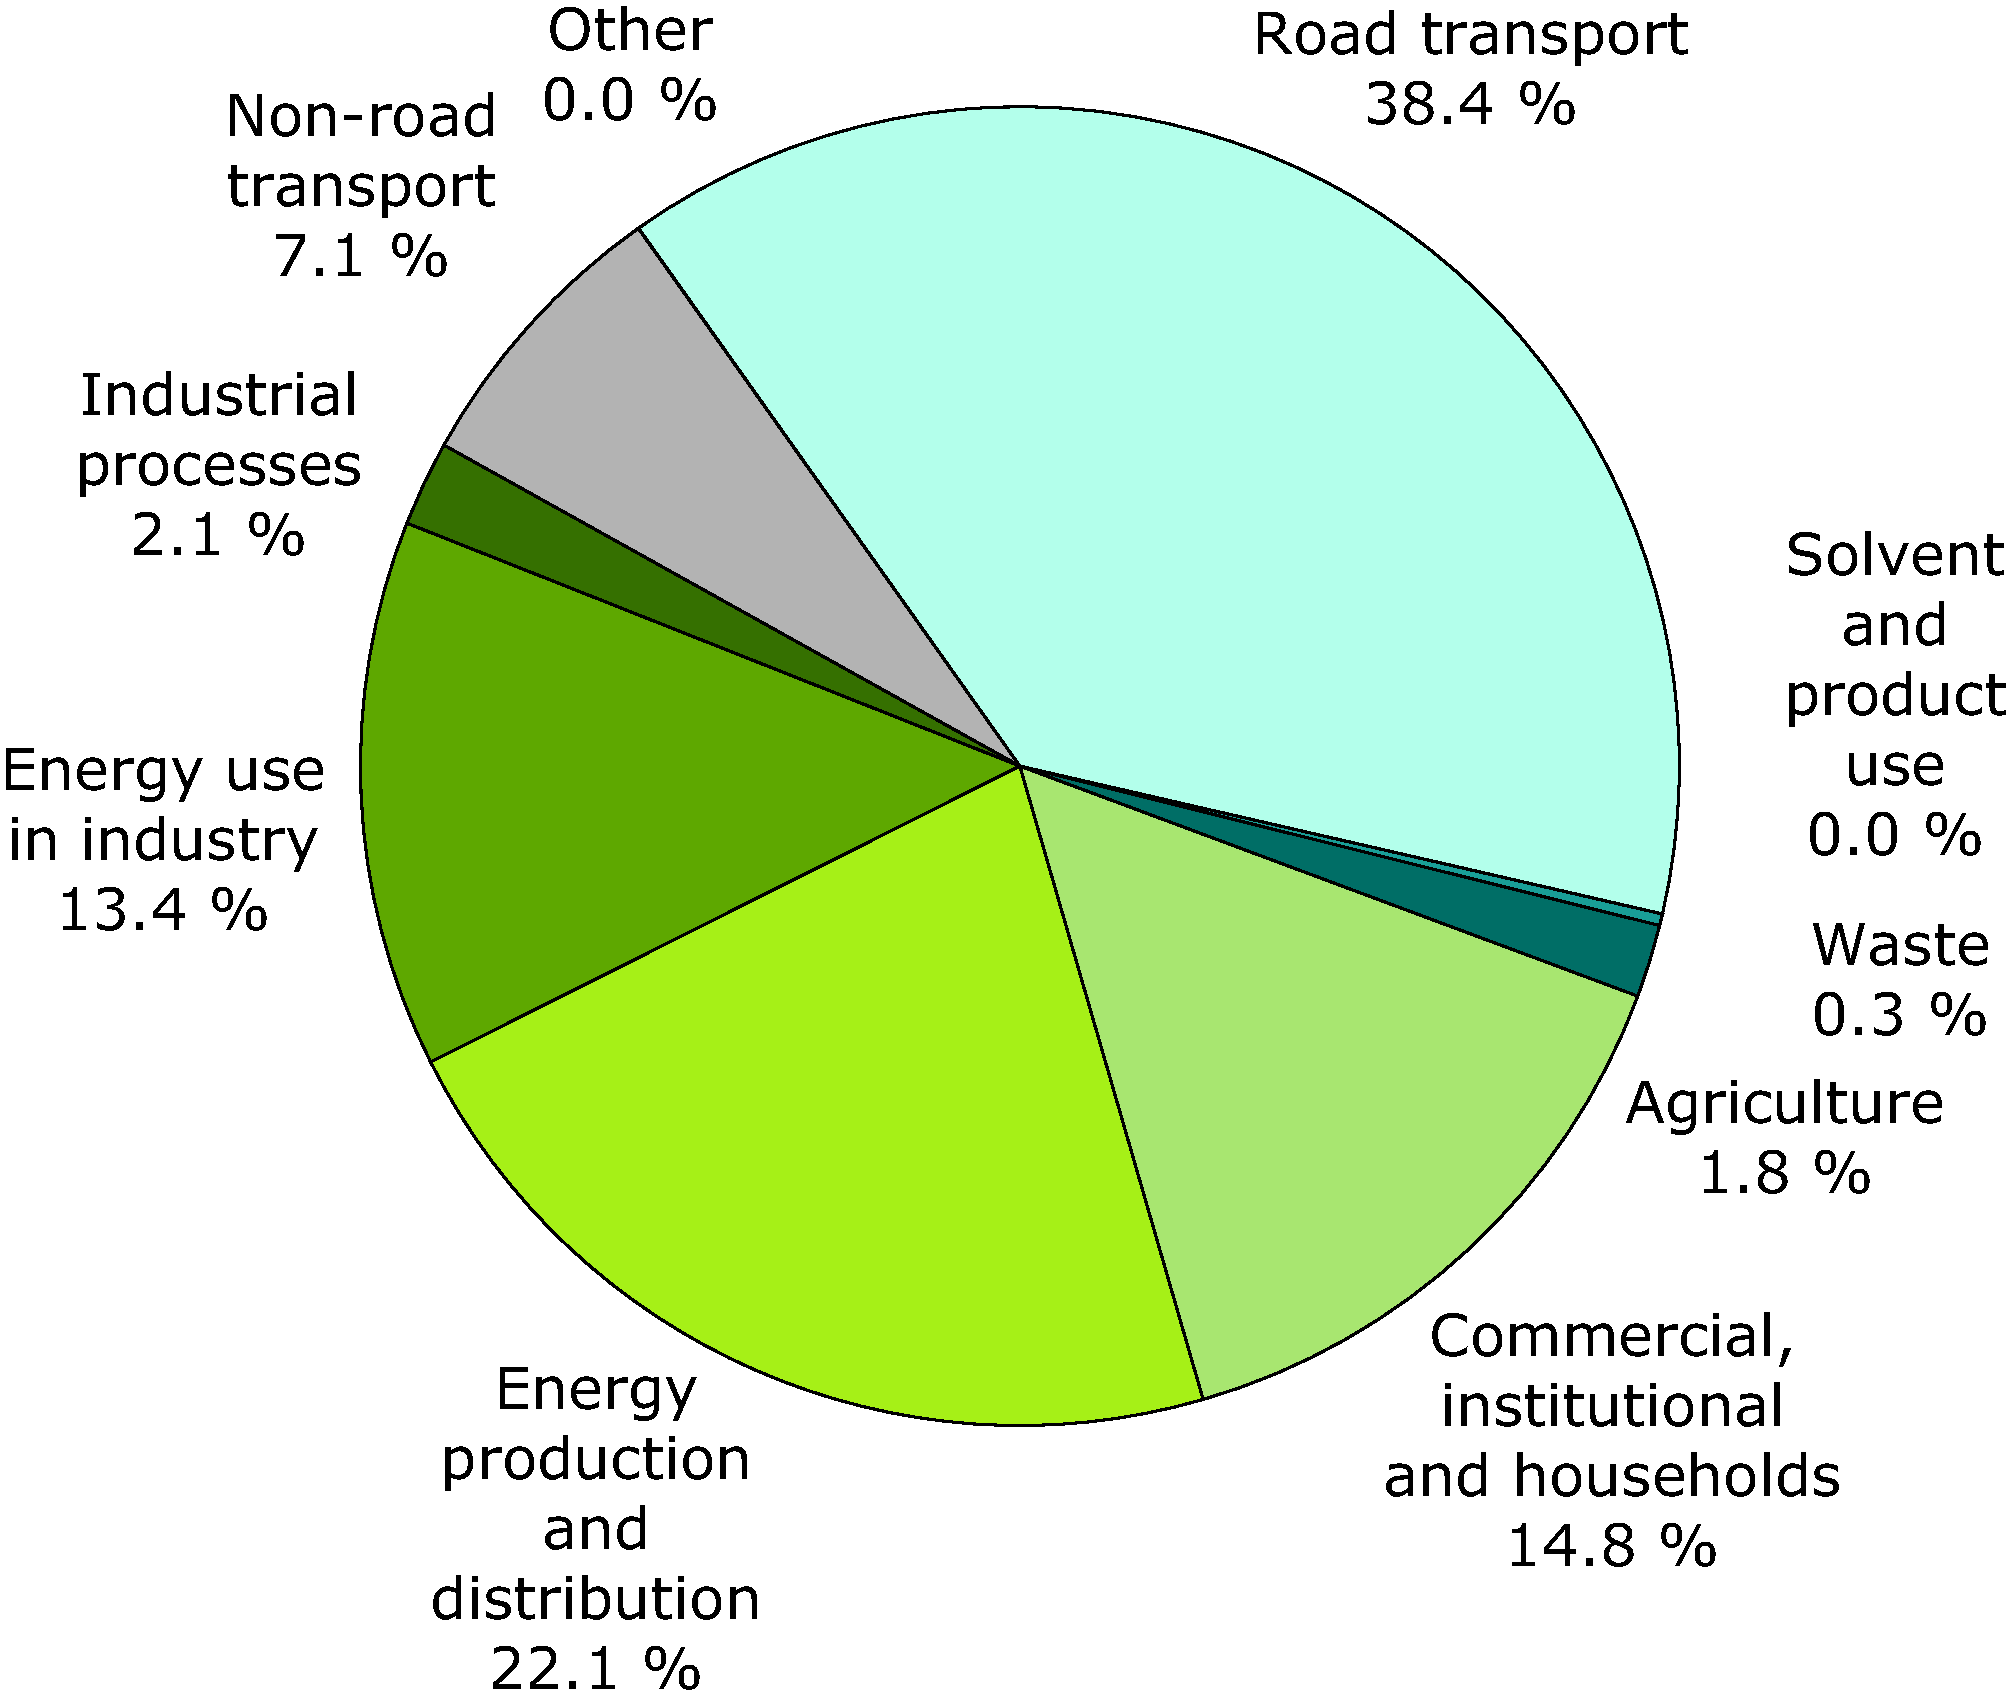 Sector share of nitrogen oxides emissions (EEA member countries)